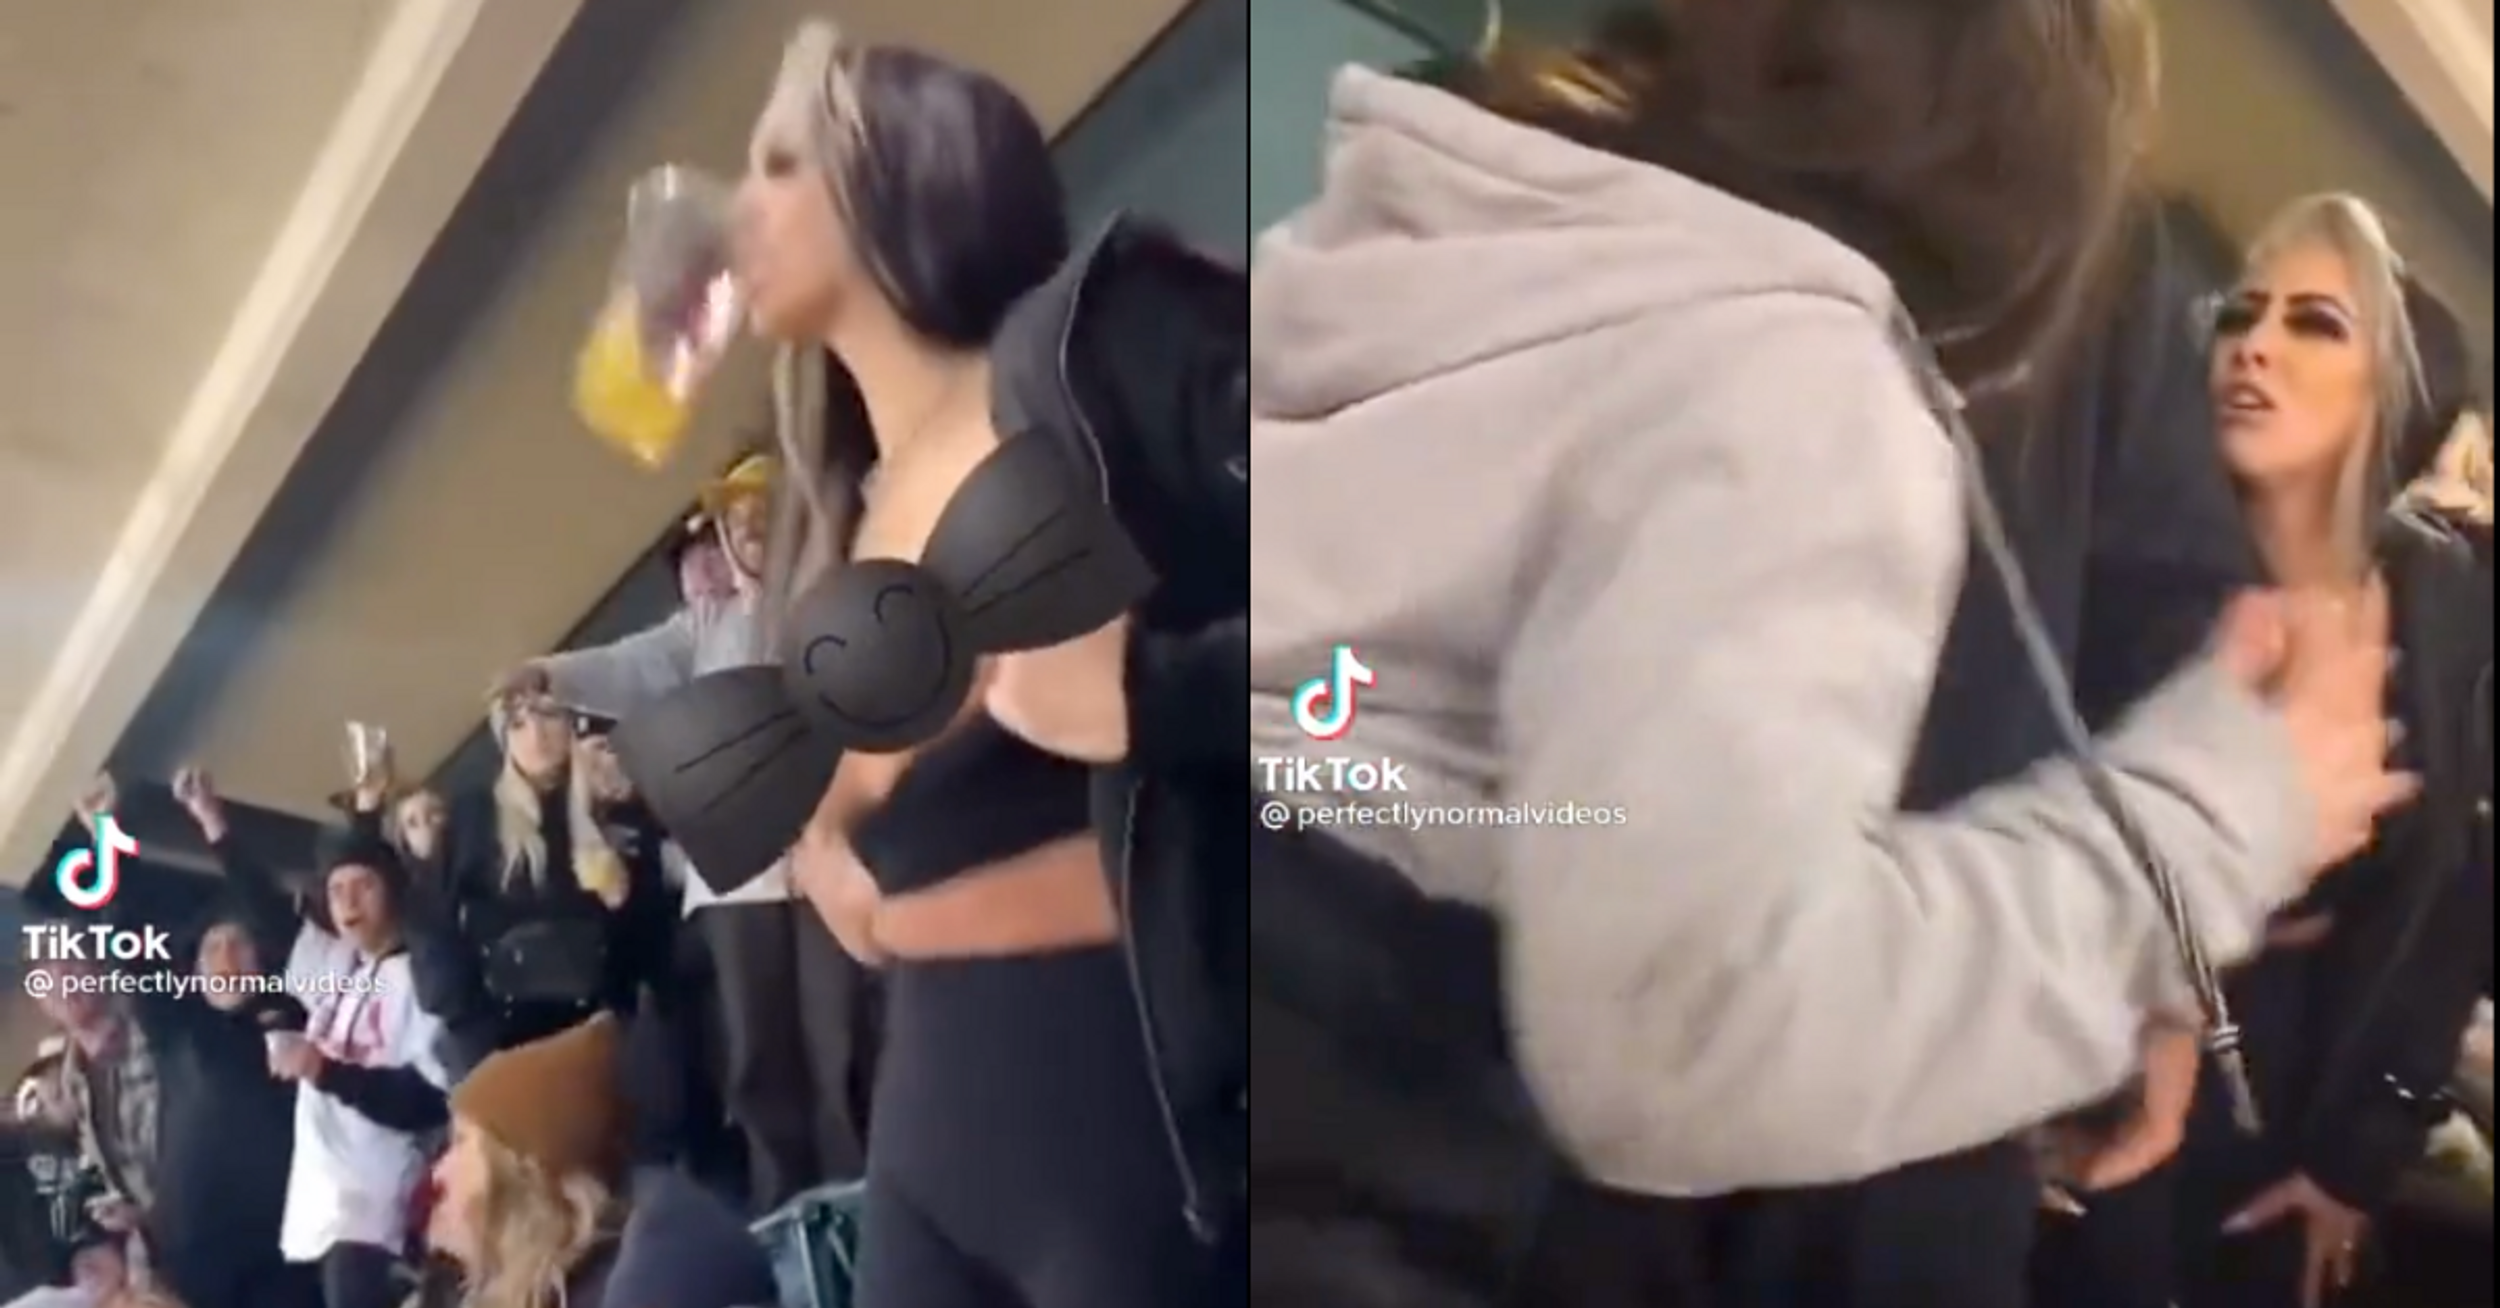 Viral Video Captures Fight Breaking Out At Supercross Event After Woman Flashes The Crowd